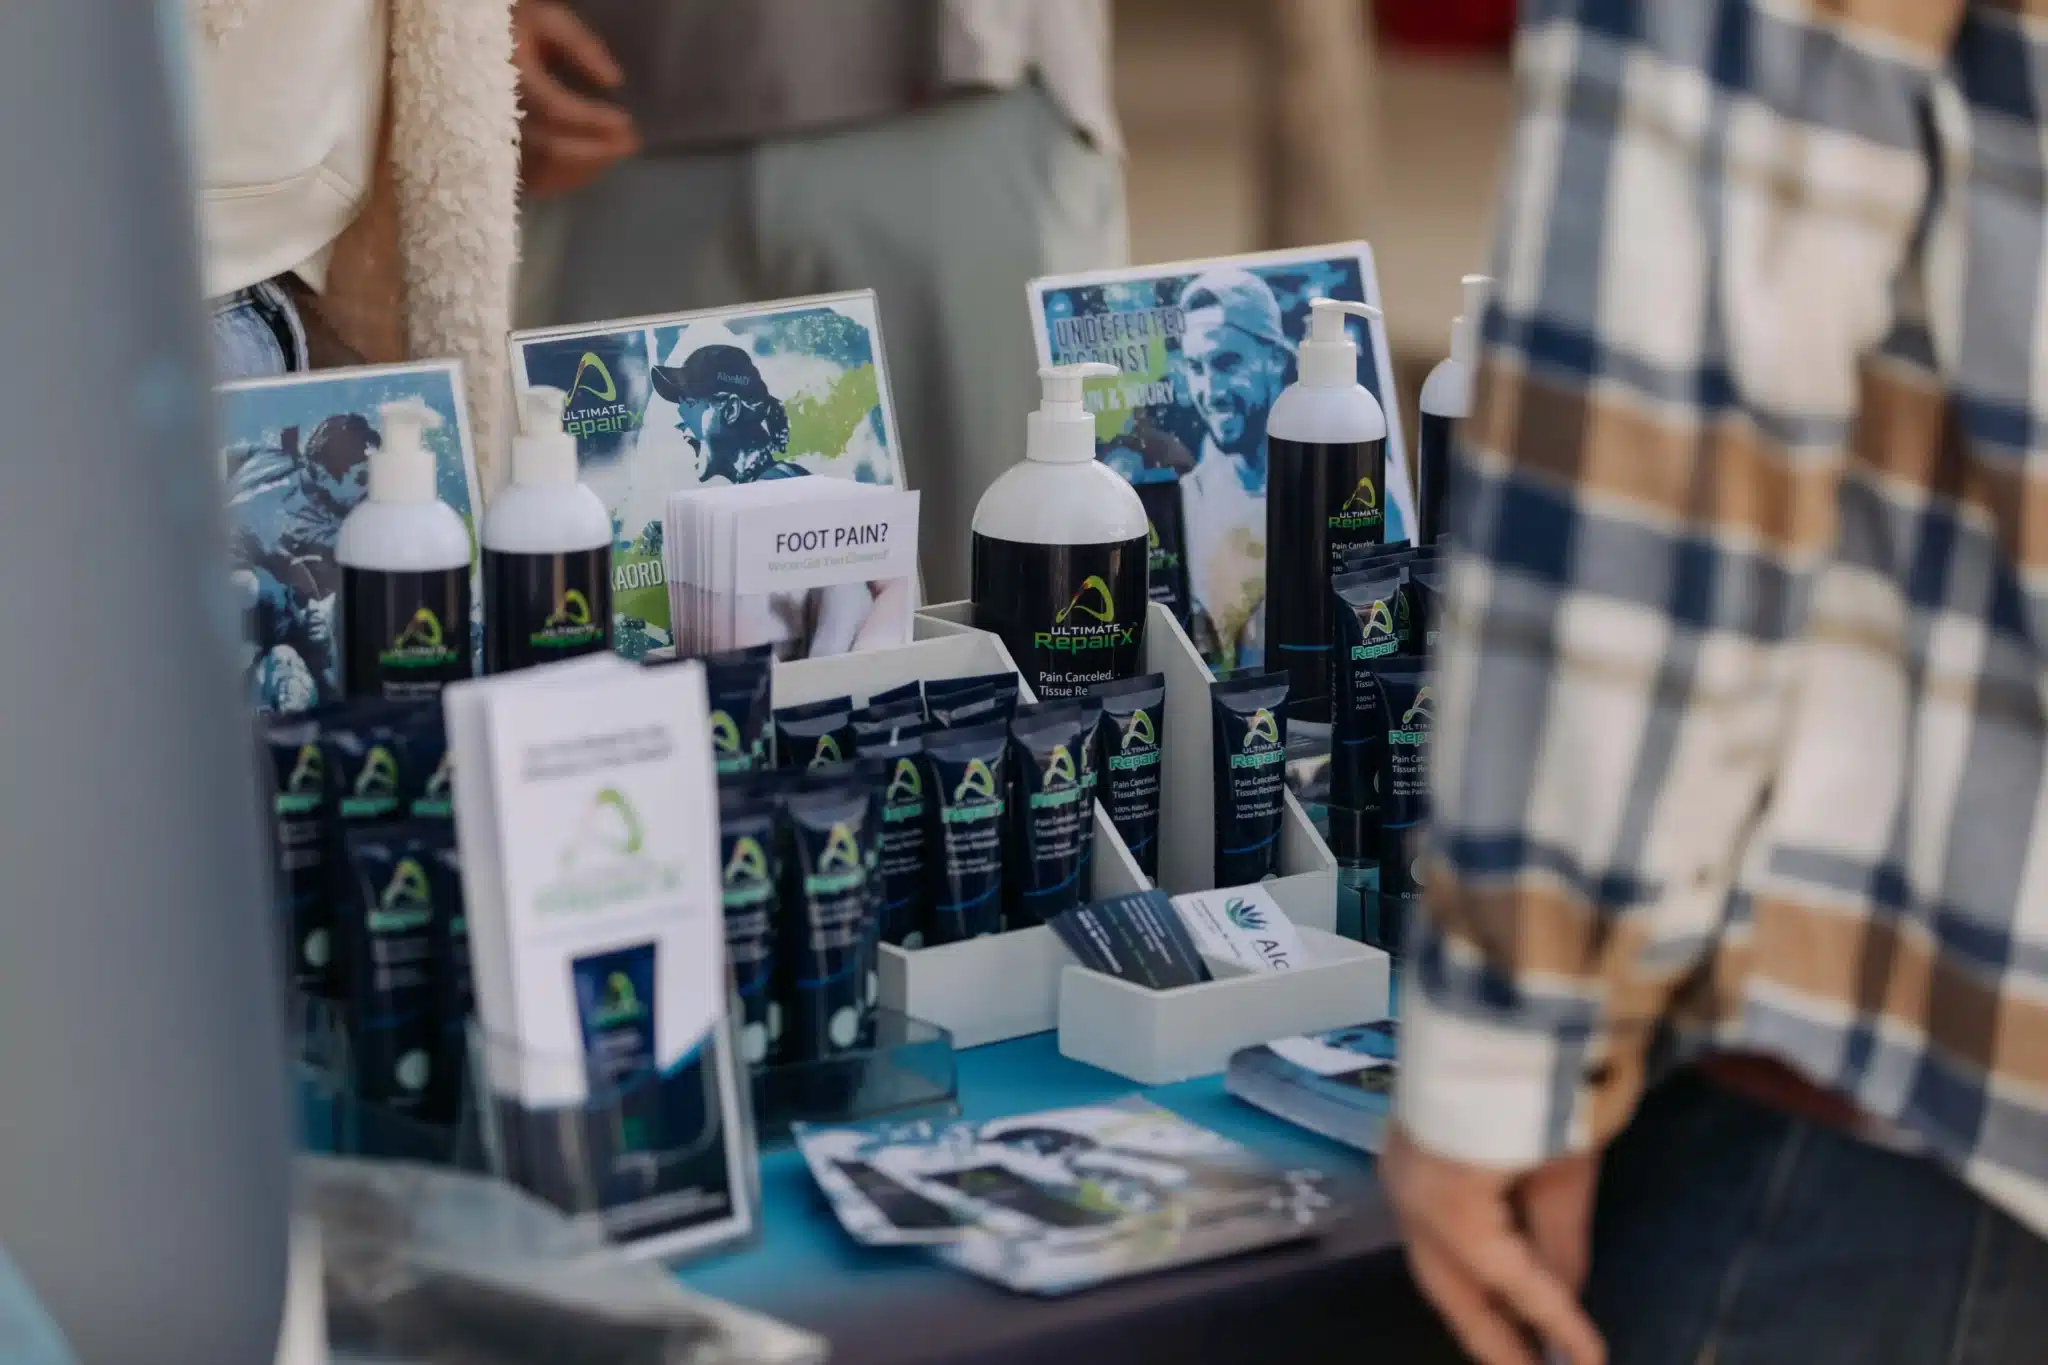 aloe md products featured at a tournament